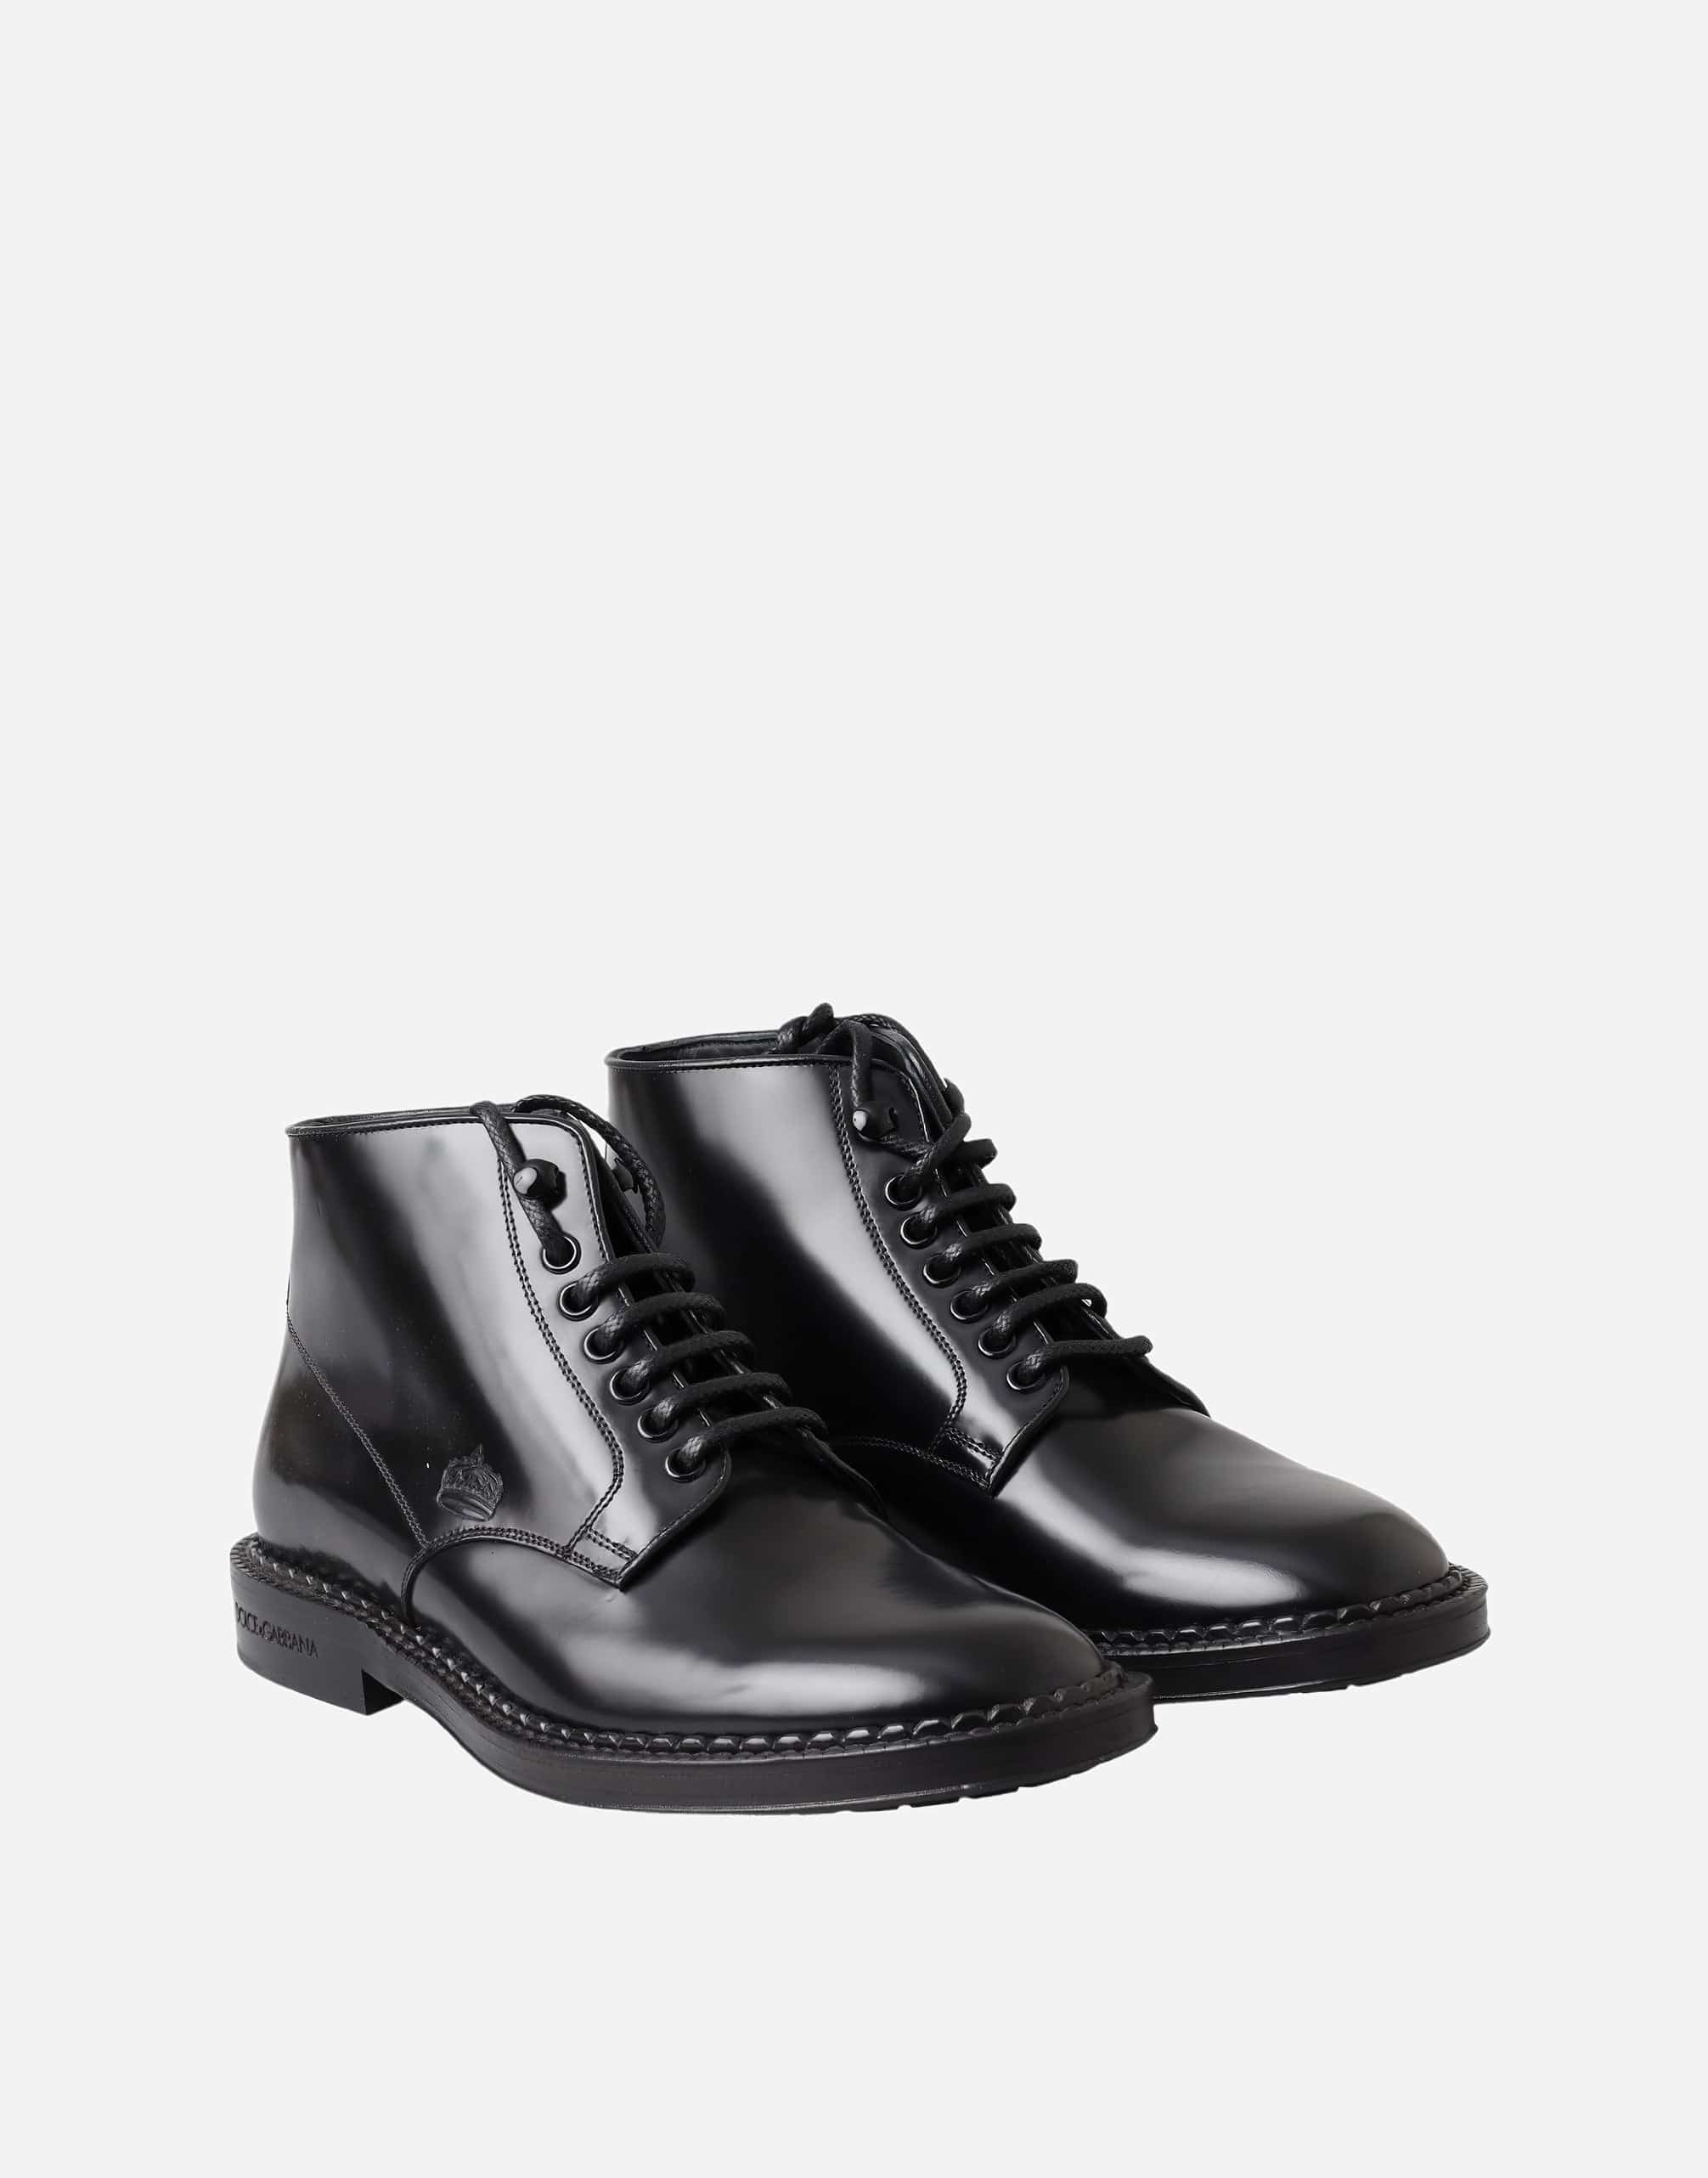 Dolce & Gabbana Polished Leather Ankle Boots